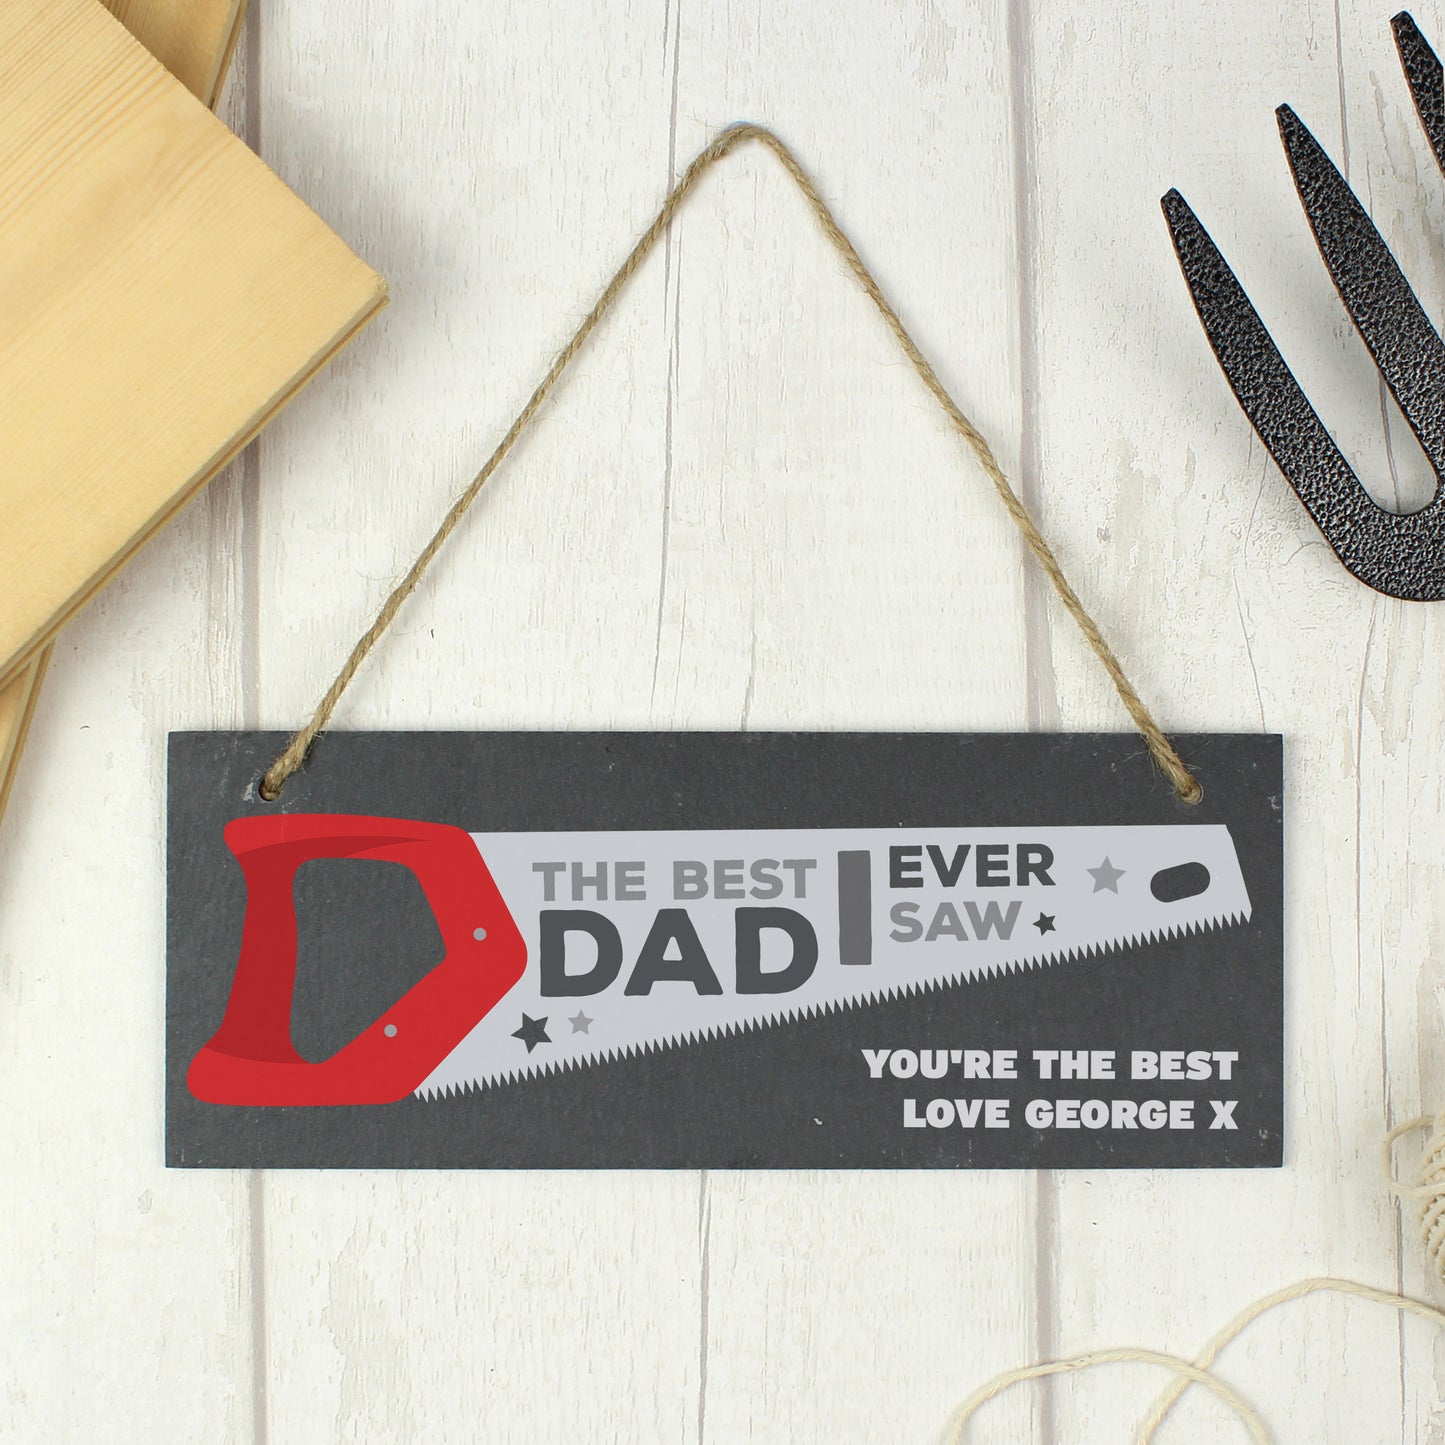 Personalised The Best Dad Ever Saw Printed Hanging Slate Sign 